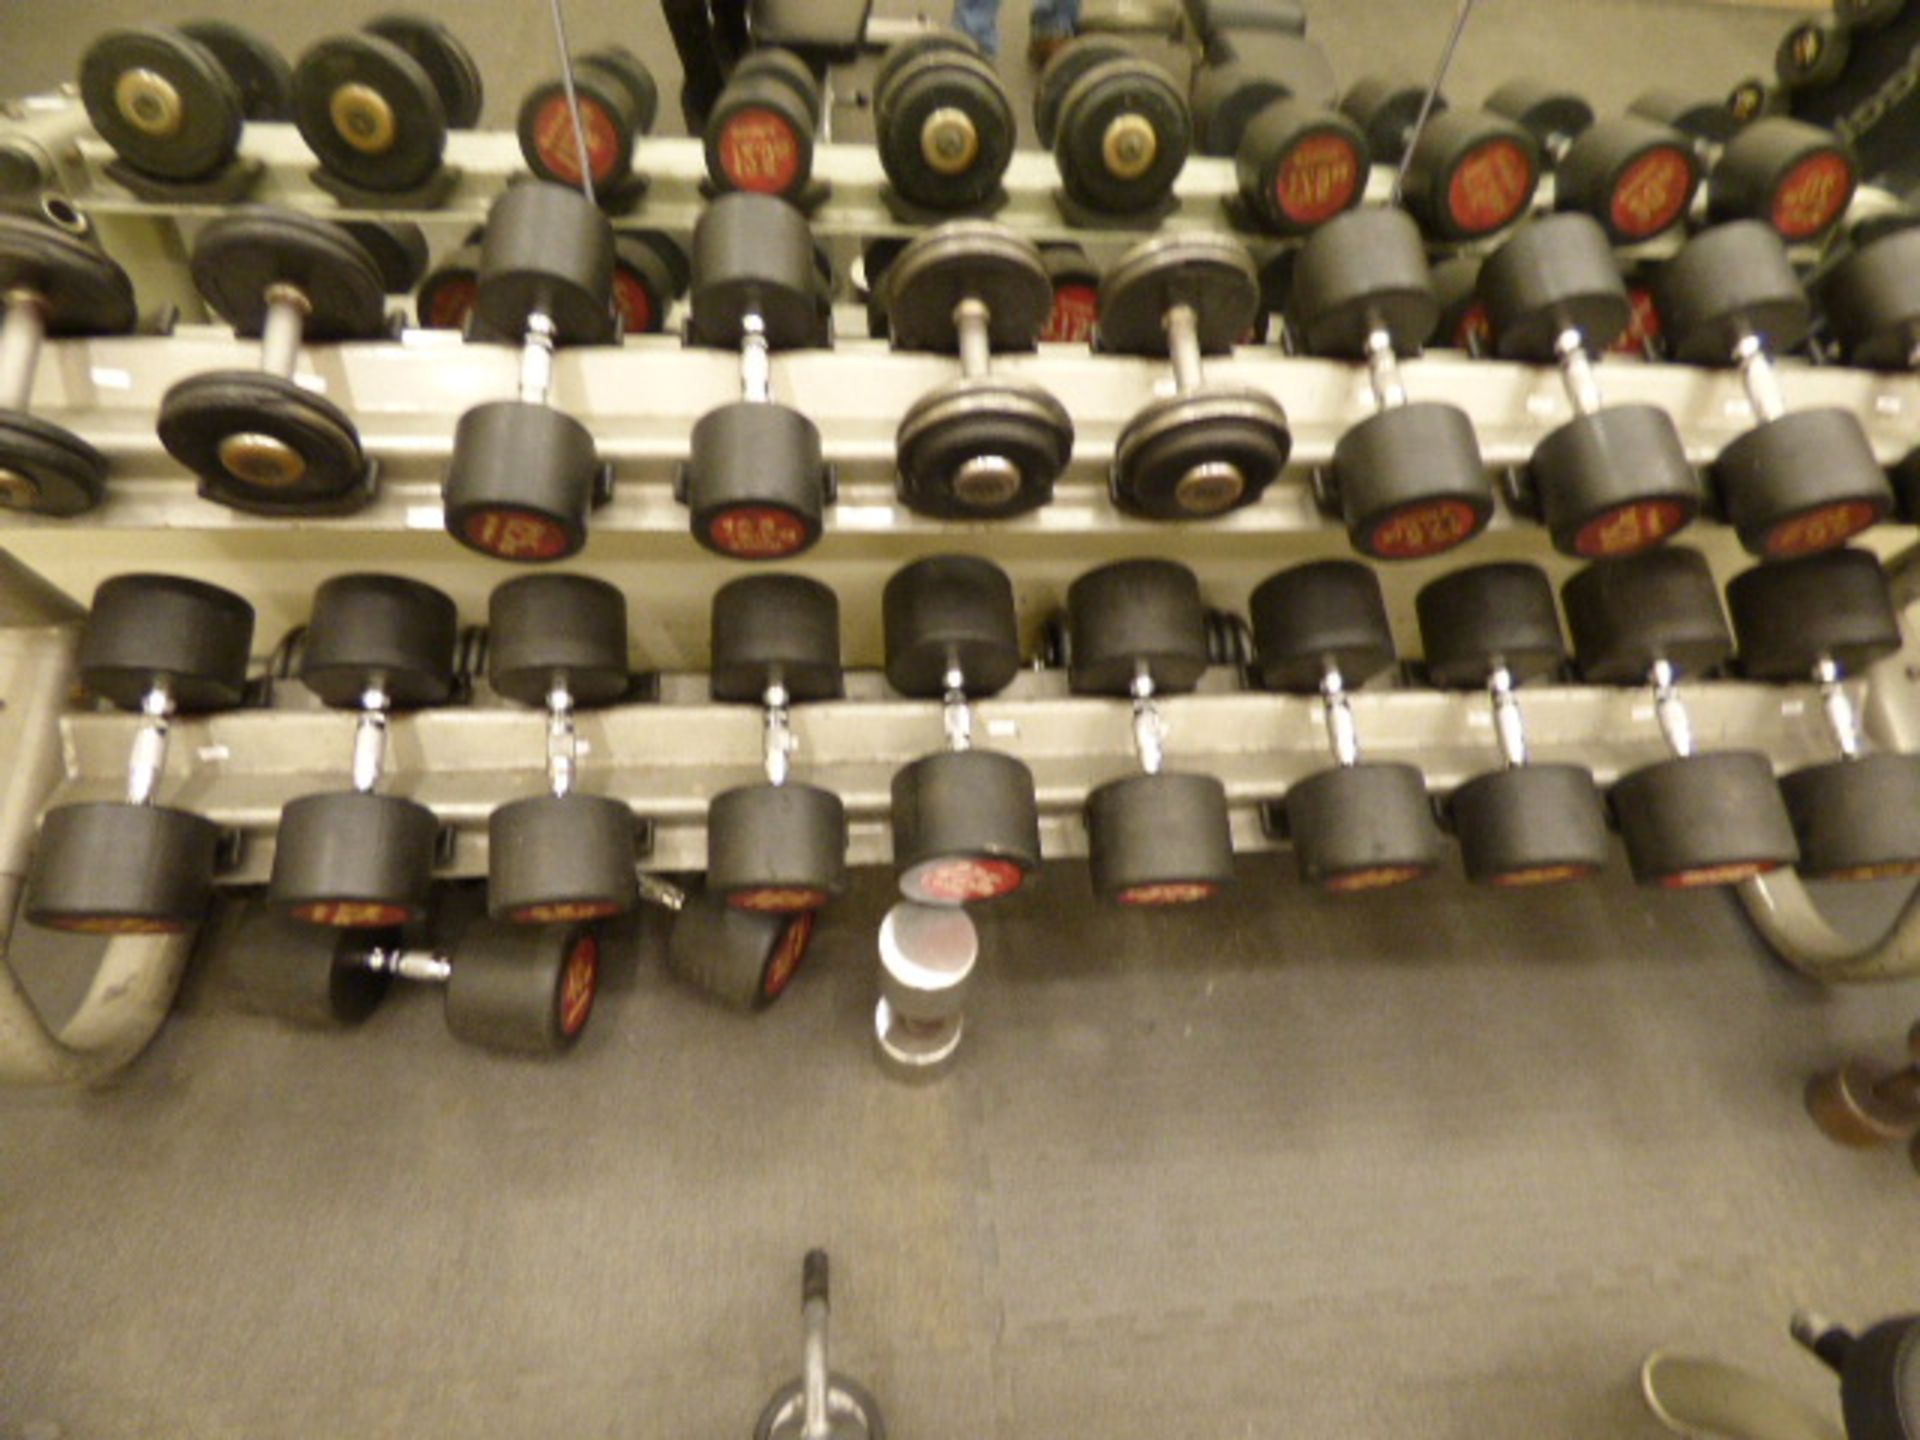 *Matrix Dumbbell rack containing 12 pairs of dumbbell ranging from 10kg to 40 kg